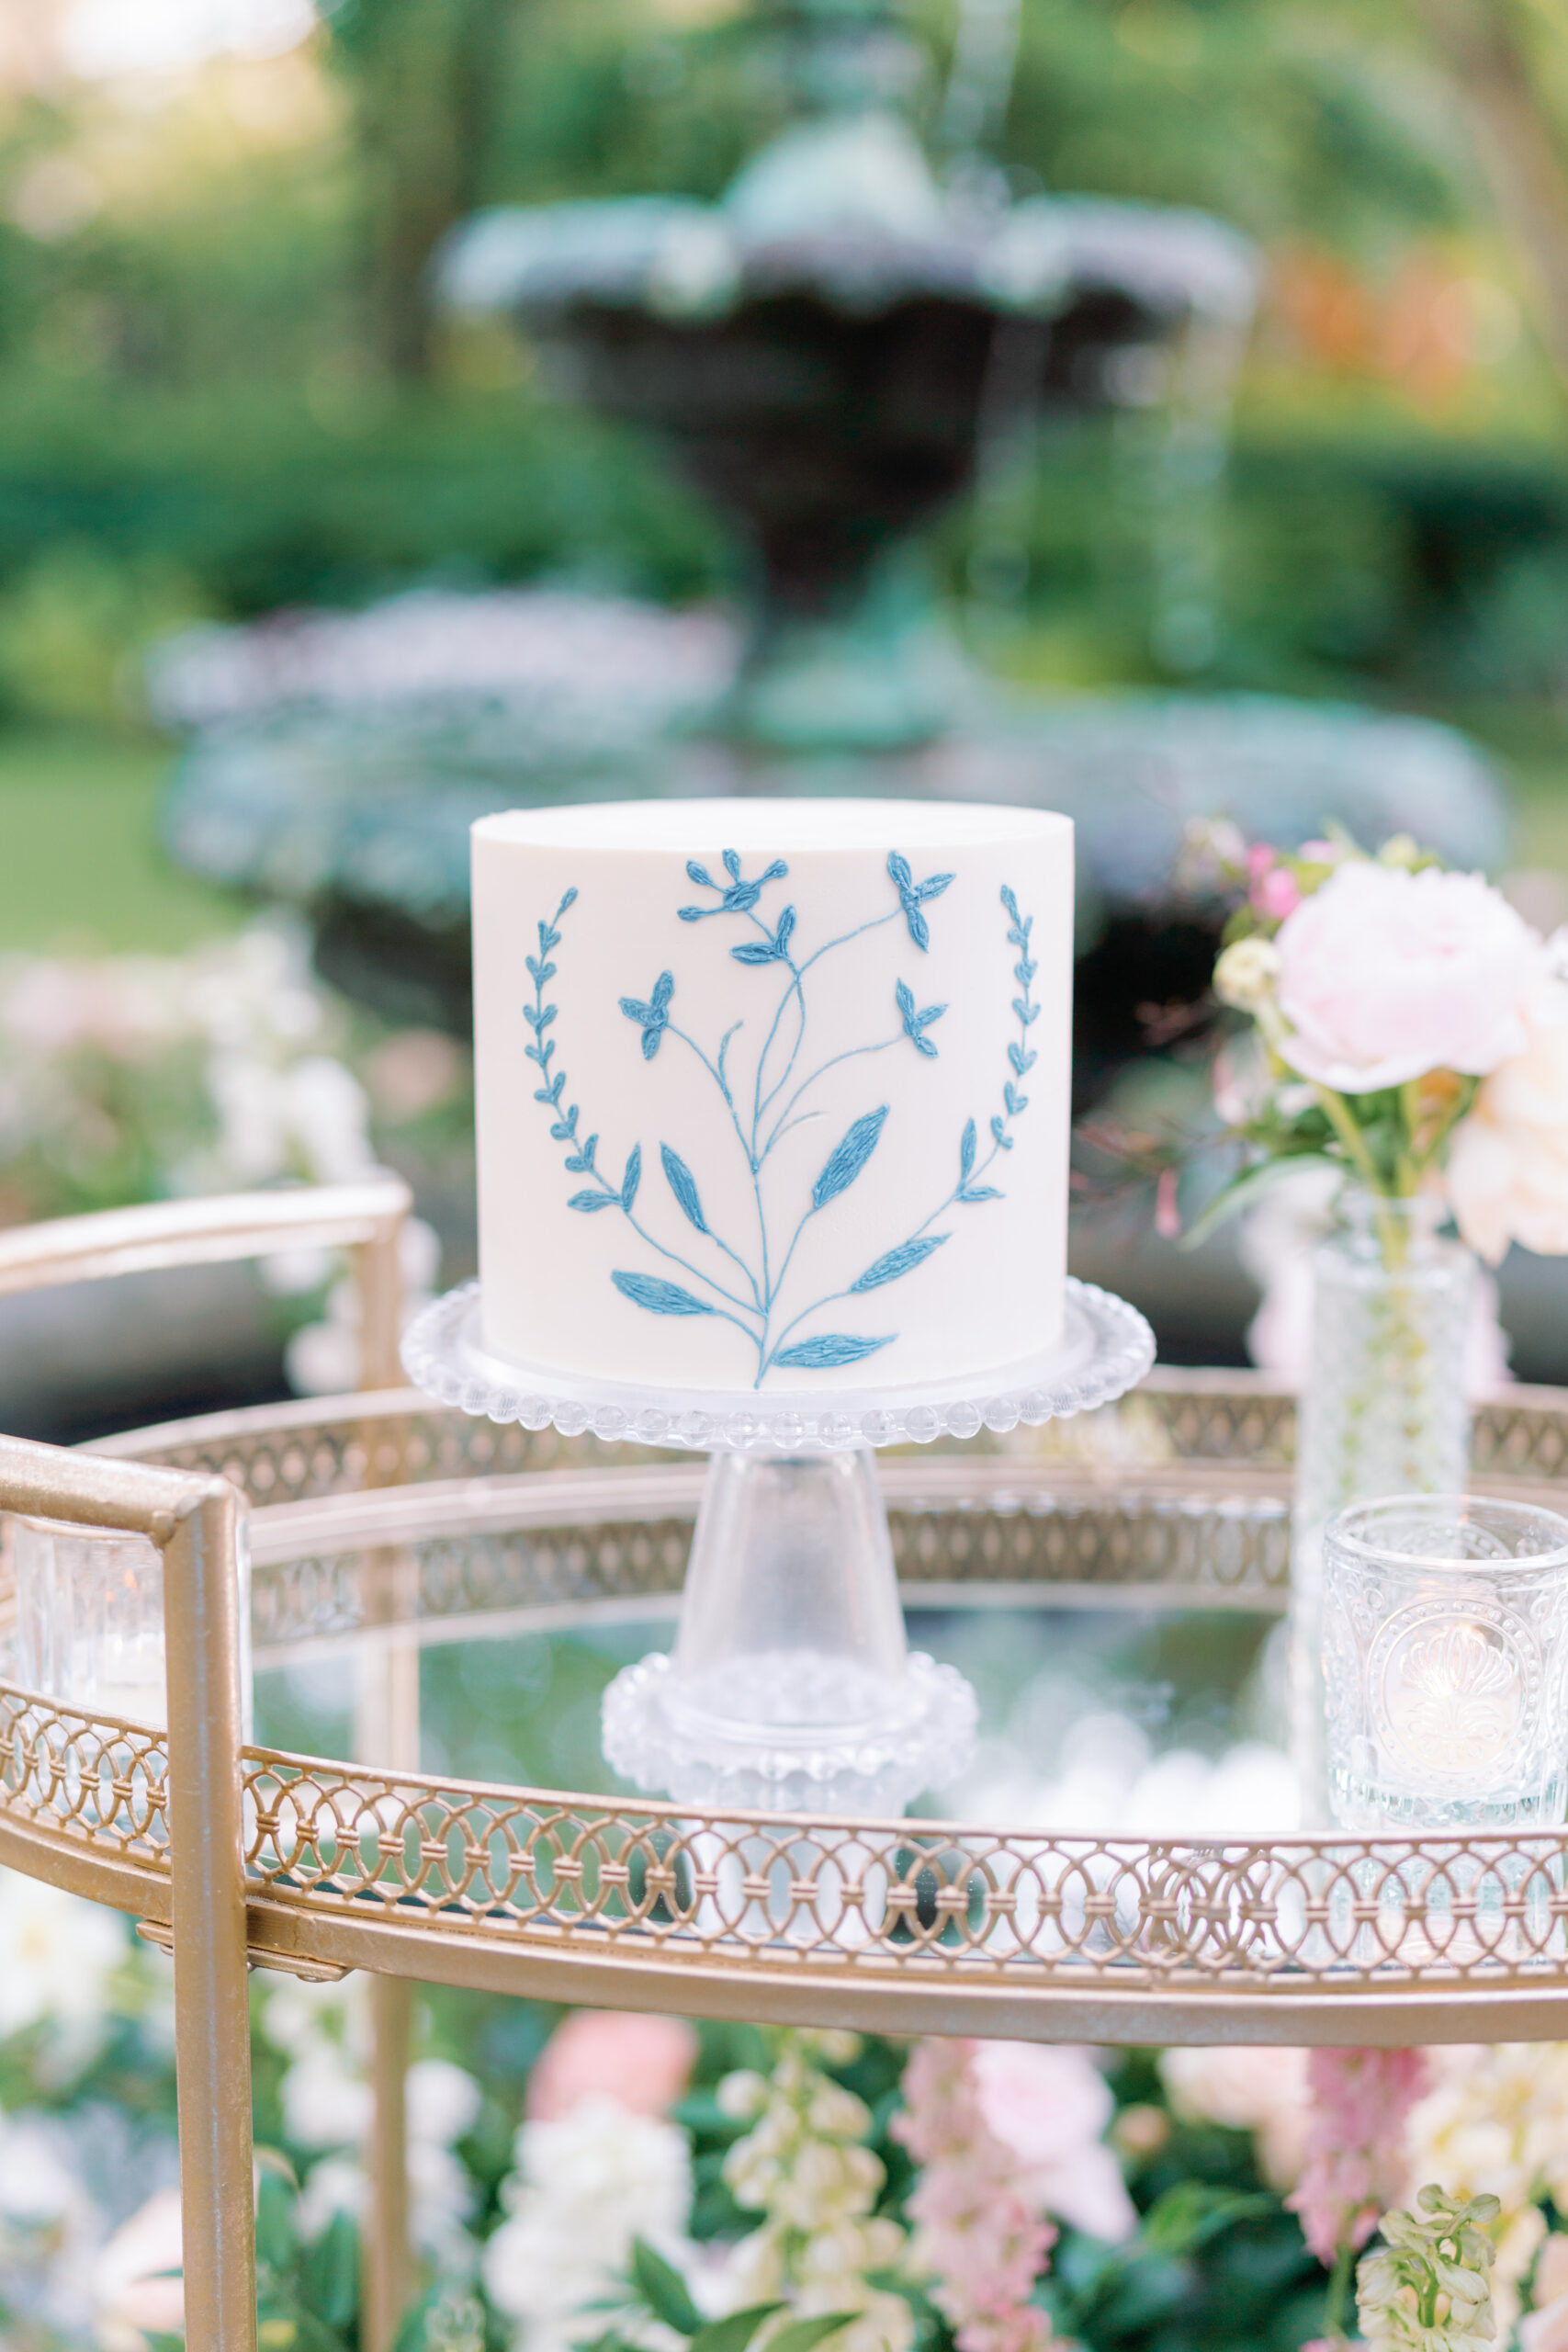 Simple white wedding cake with blue wildflower detail.